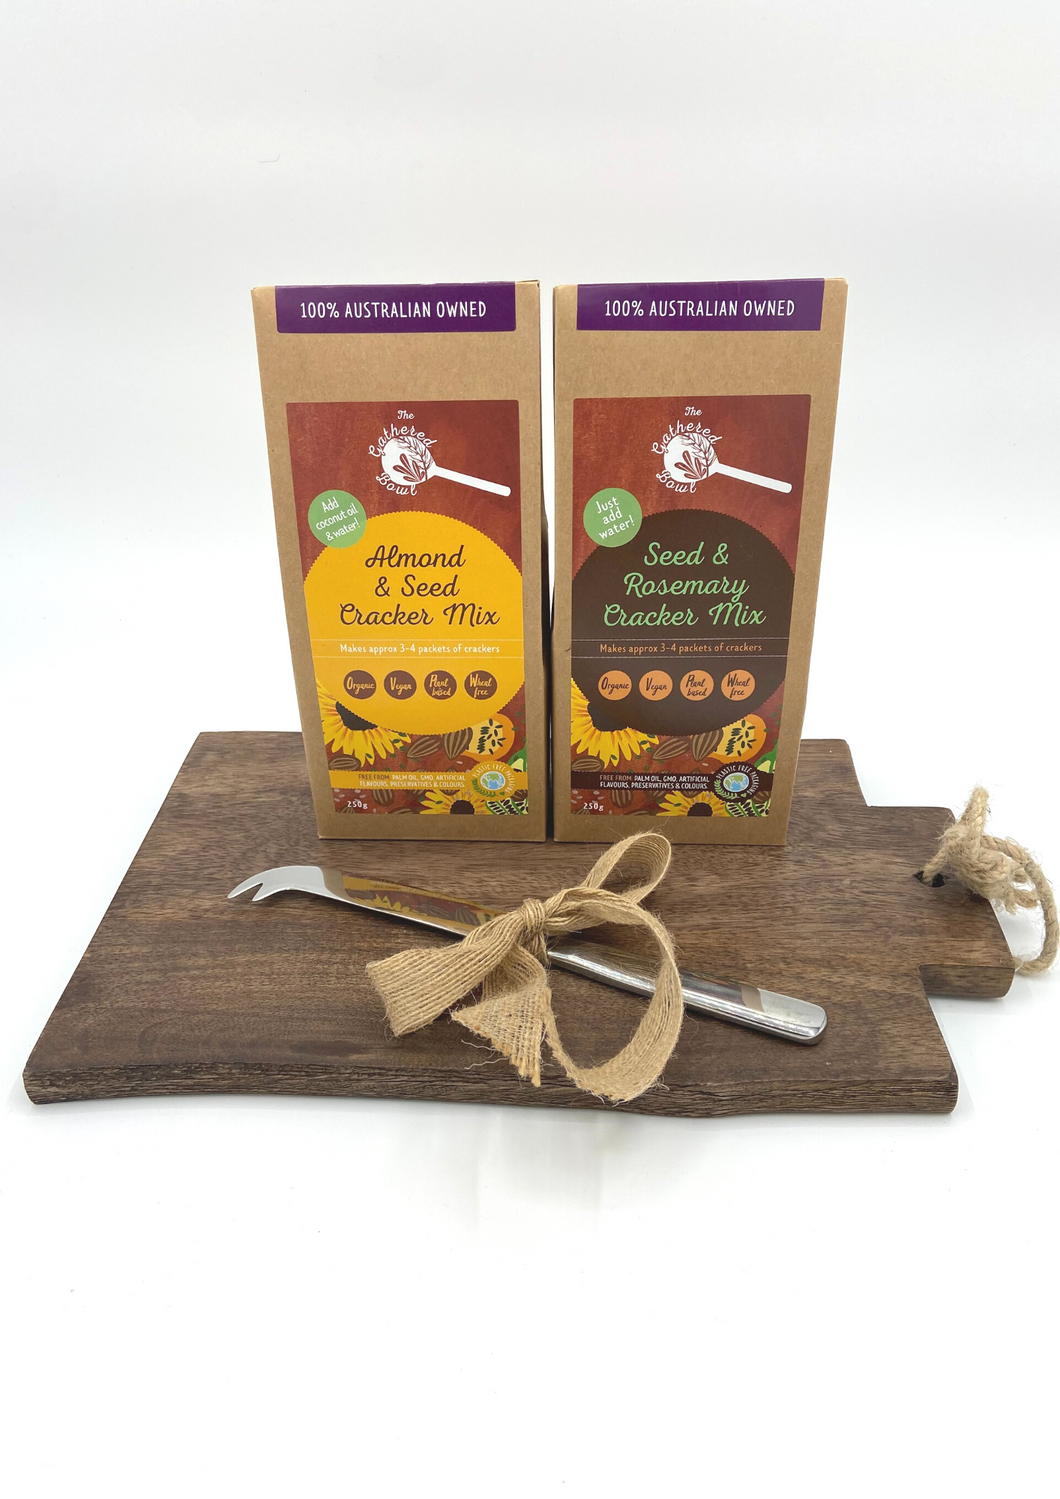 This simple but thoughtfully gathered gift hamper from the Gathered Bowl contains one wooded chopping Board, Almond and seed Cracker Mix, Seed and Rosemary Cracker Mic and a Cheese knife. A perfect gift for the special foodie in your life. The crackers are also keto. All of our packaging is 100% home compostable which makes this the perfect zero waste gift.